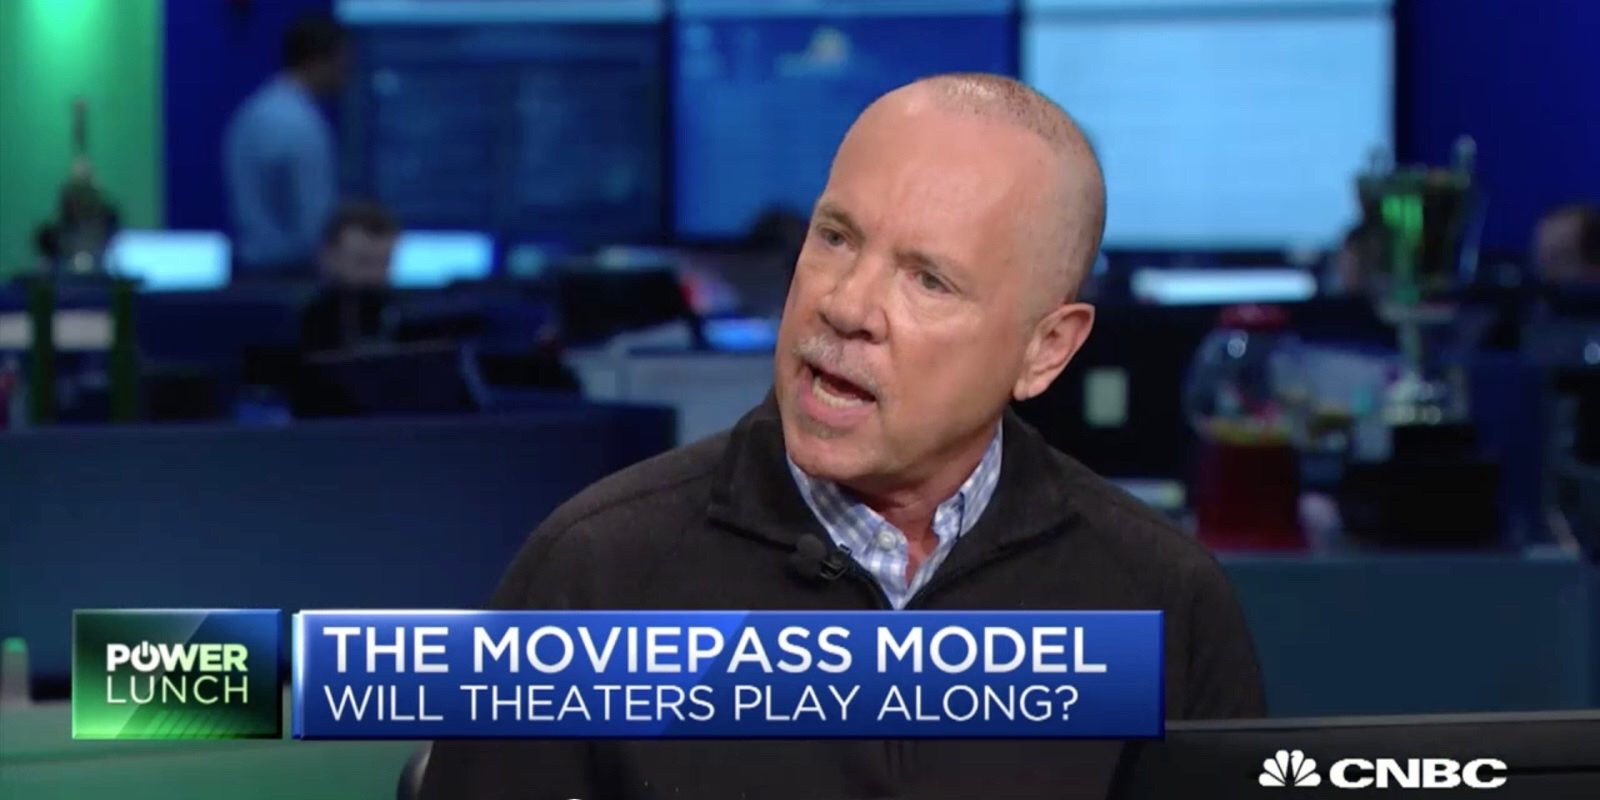 MoviePass CEO says the service tracks where you go after you leave the theater